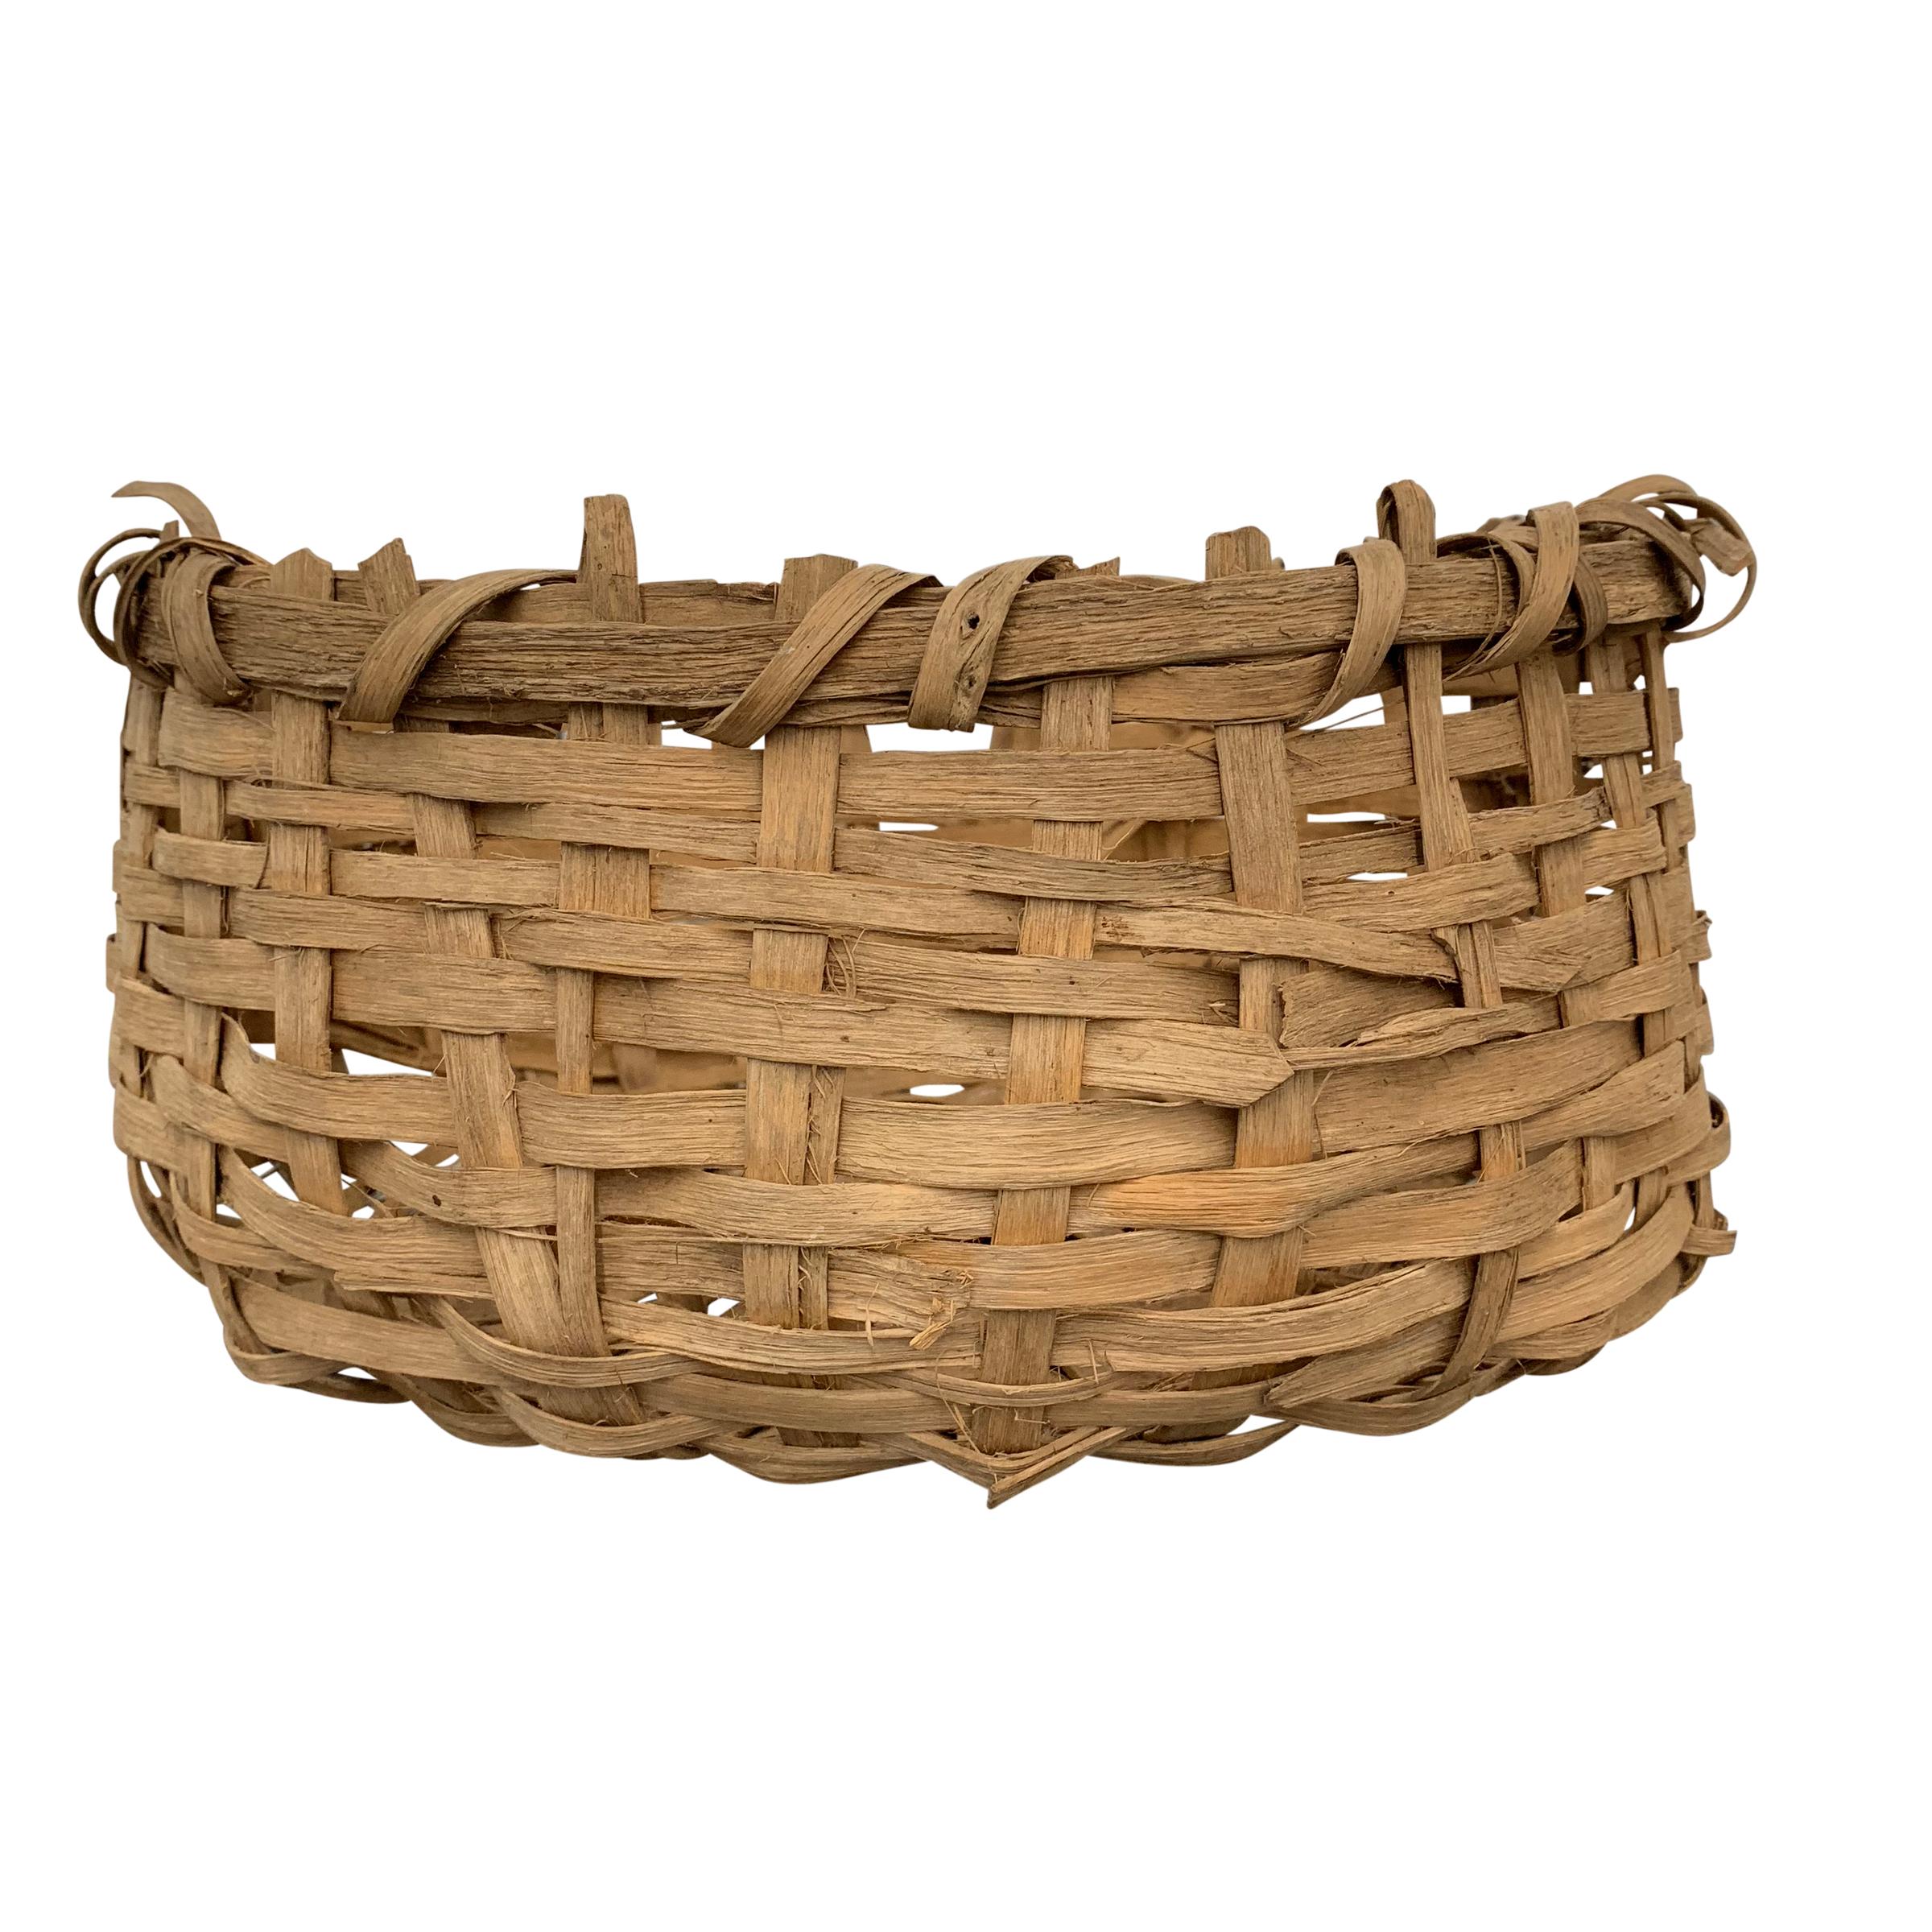 An early 20th century Bulgarian Primitive splint basket, not tightly woven, and not super refined, but a fantastic shape and equally fascinating structure.